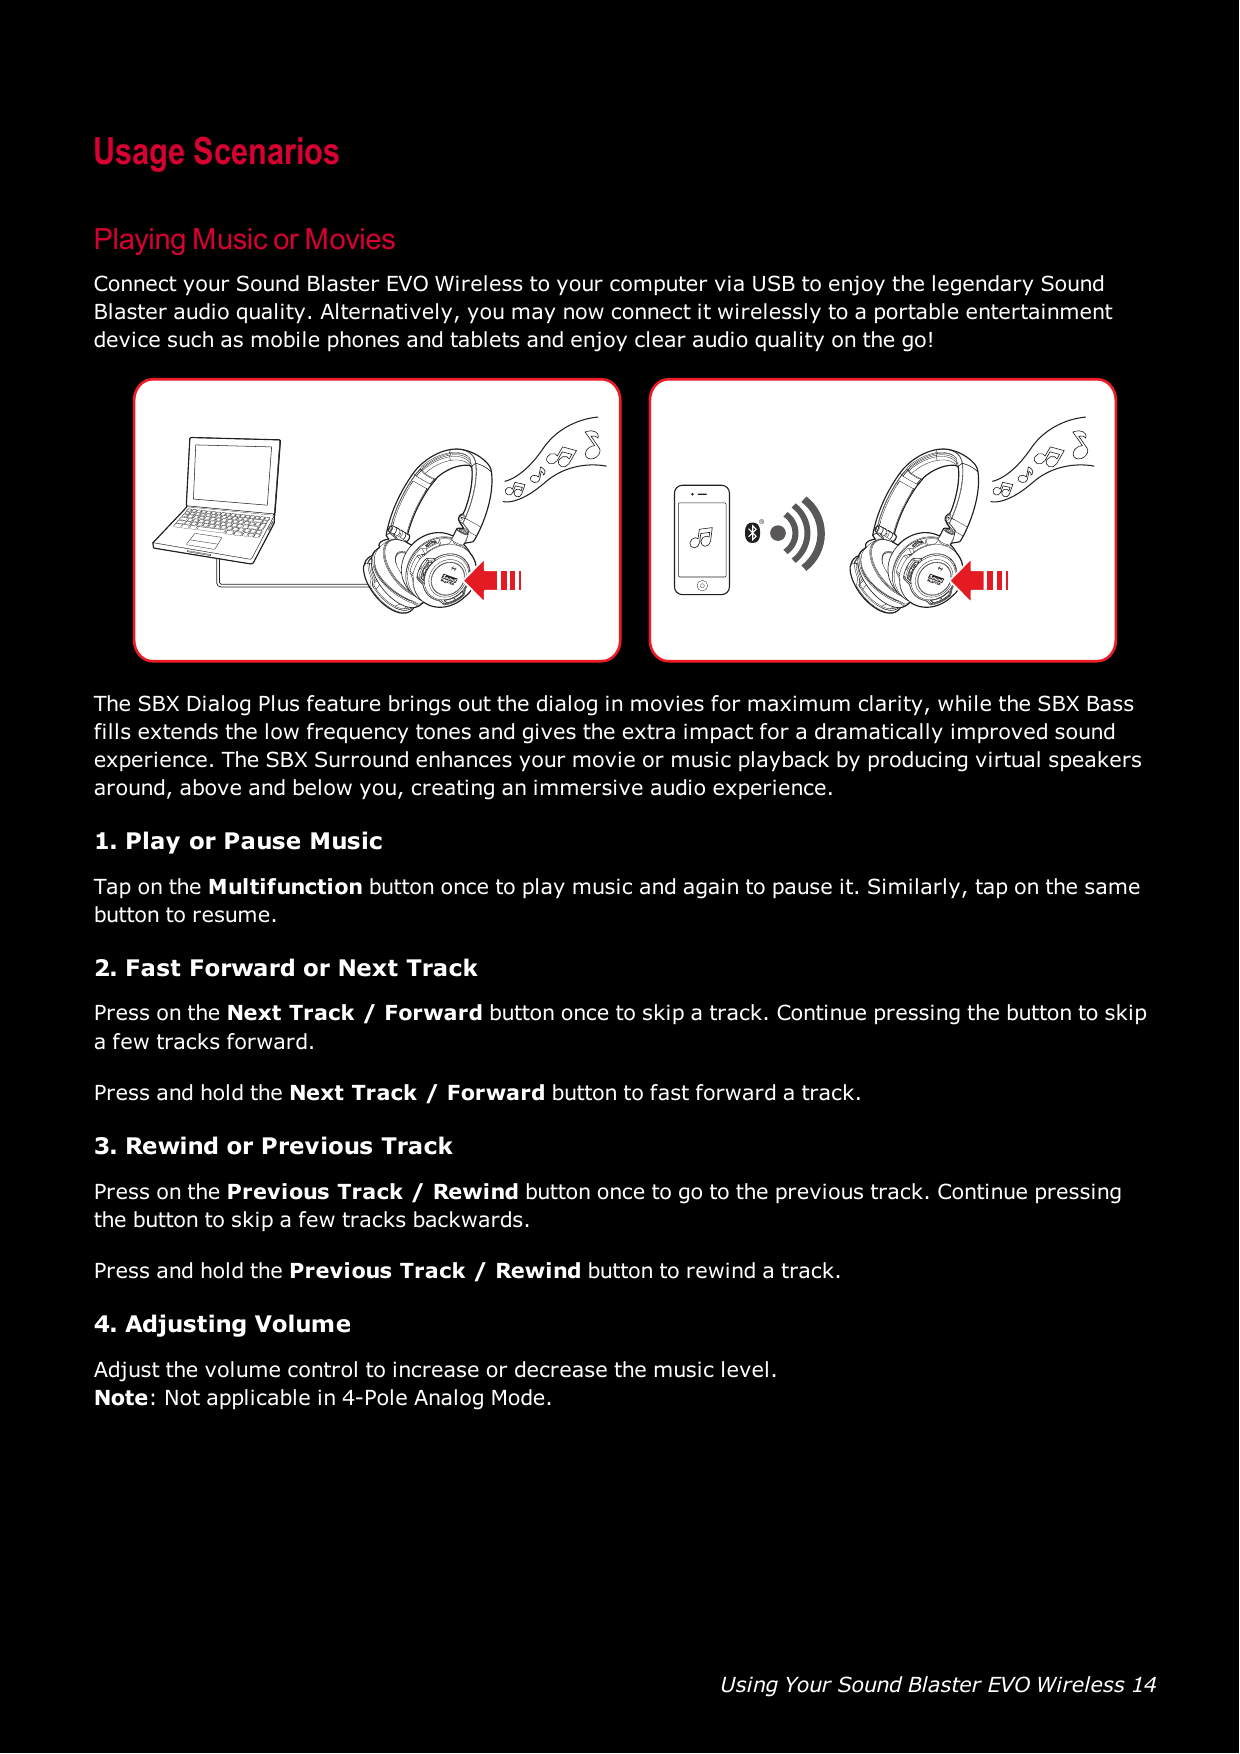 Using Your Sound Blaster EVO Wireless 14Usage ScenariosPlaying Music or MoviesConnect your Sound Blaster EVO Wireless to your computer via USB to enjoy the legendary SoundBlaster audio quality. Alternatively, you may now connect it wirelessly to a portable entertainmentdevice such as mobile phones and tablets and enjoy clear audio quality on the go!The SBX Dialog Plus feature brings out the dialog in movies for maximum clarity, while the SBX Bassfills extends the low frequency tones and gives the extra impact for a dramatically improved soundexperience. The SBX Surround enhances your movie or music playback by producing virtual speakersaround, above and below you, creating an immersive audio experience.1. Play or Pause MusicTap on the Multifunction button once to play music and again to pause it. Similarly, tap on the samebutton to resume.2. Fast Forward or Next TrackPress on the Next Track / Forward button once to skip a track. Continue pressing the button to skipa few tracks forward.Press and hold the Next Track / Forward button to fast forward a track.3. Rewind or Previous TrackPress on the Previous Track / Rewind button once to go to the previous track. Continue pressingthe button to skip a few tracks backwards.Press and hold the Previous Track / Rewind button to rewind a track.4. Adjusting VolumeAdjust the volume control to increase or decrease the music level.Note: Not applicable in 4-Pole Analog Mode.